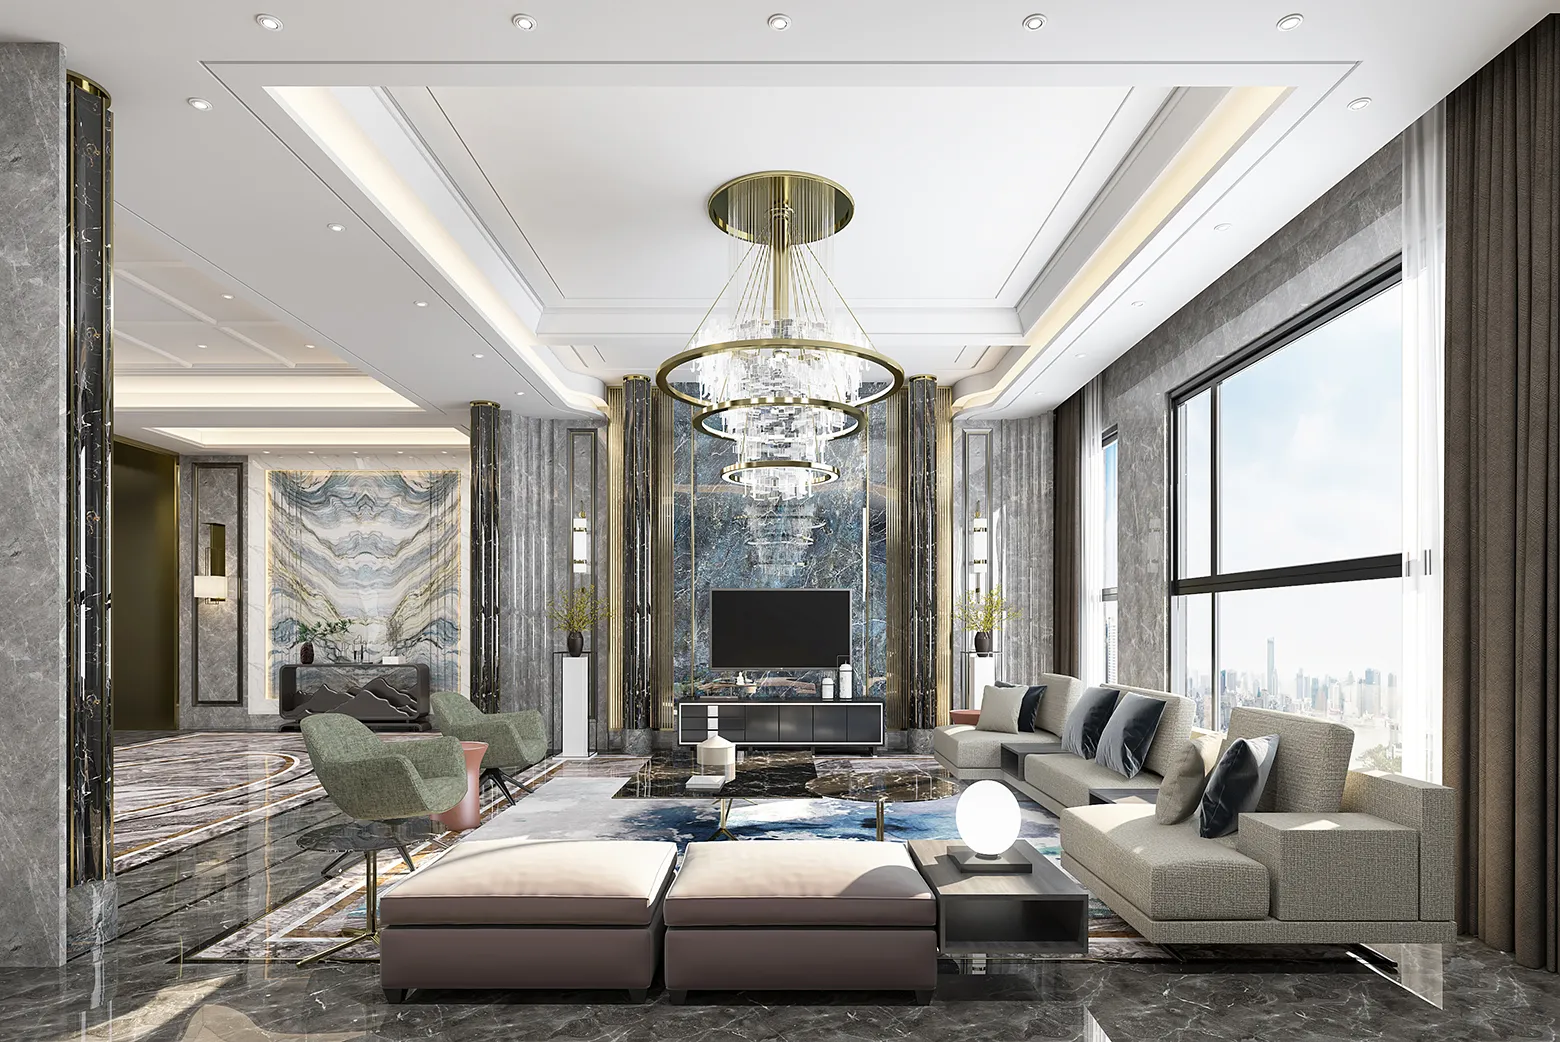 DESMOD INTERIOR 2021 (VRAY) – 4. LIVING ROOM – CHINESE – 108